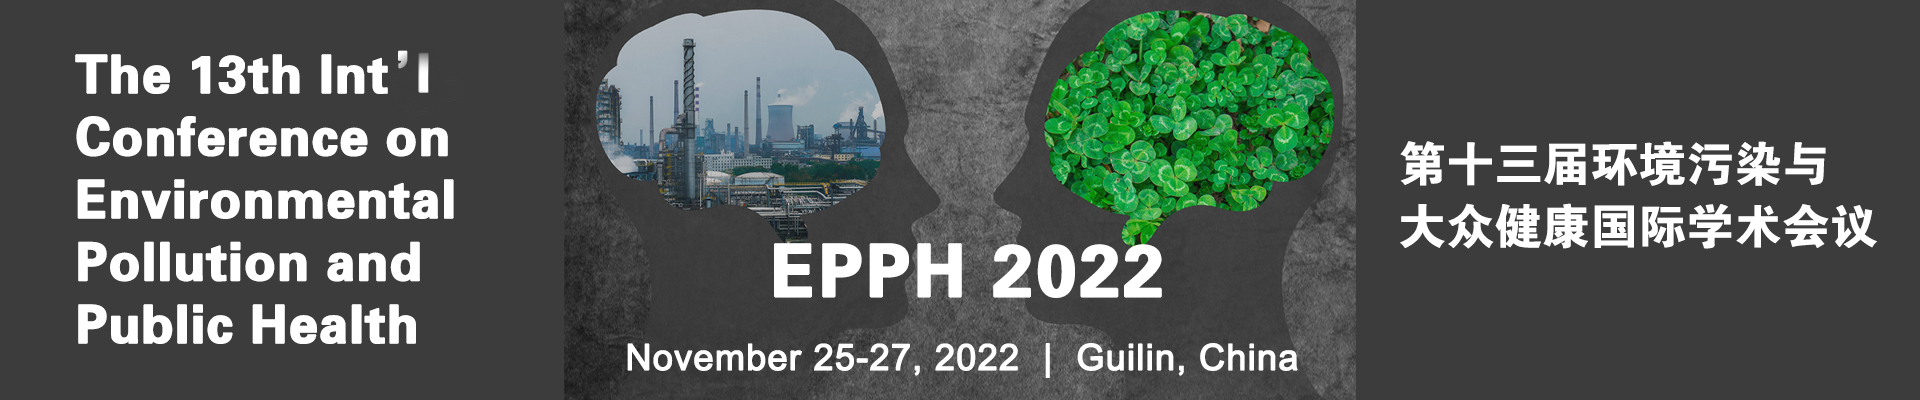 The 13th International Conference on Environmental Pollution and Public Health (EPPH 2022)